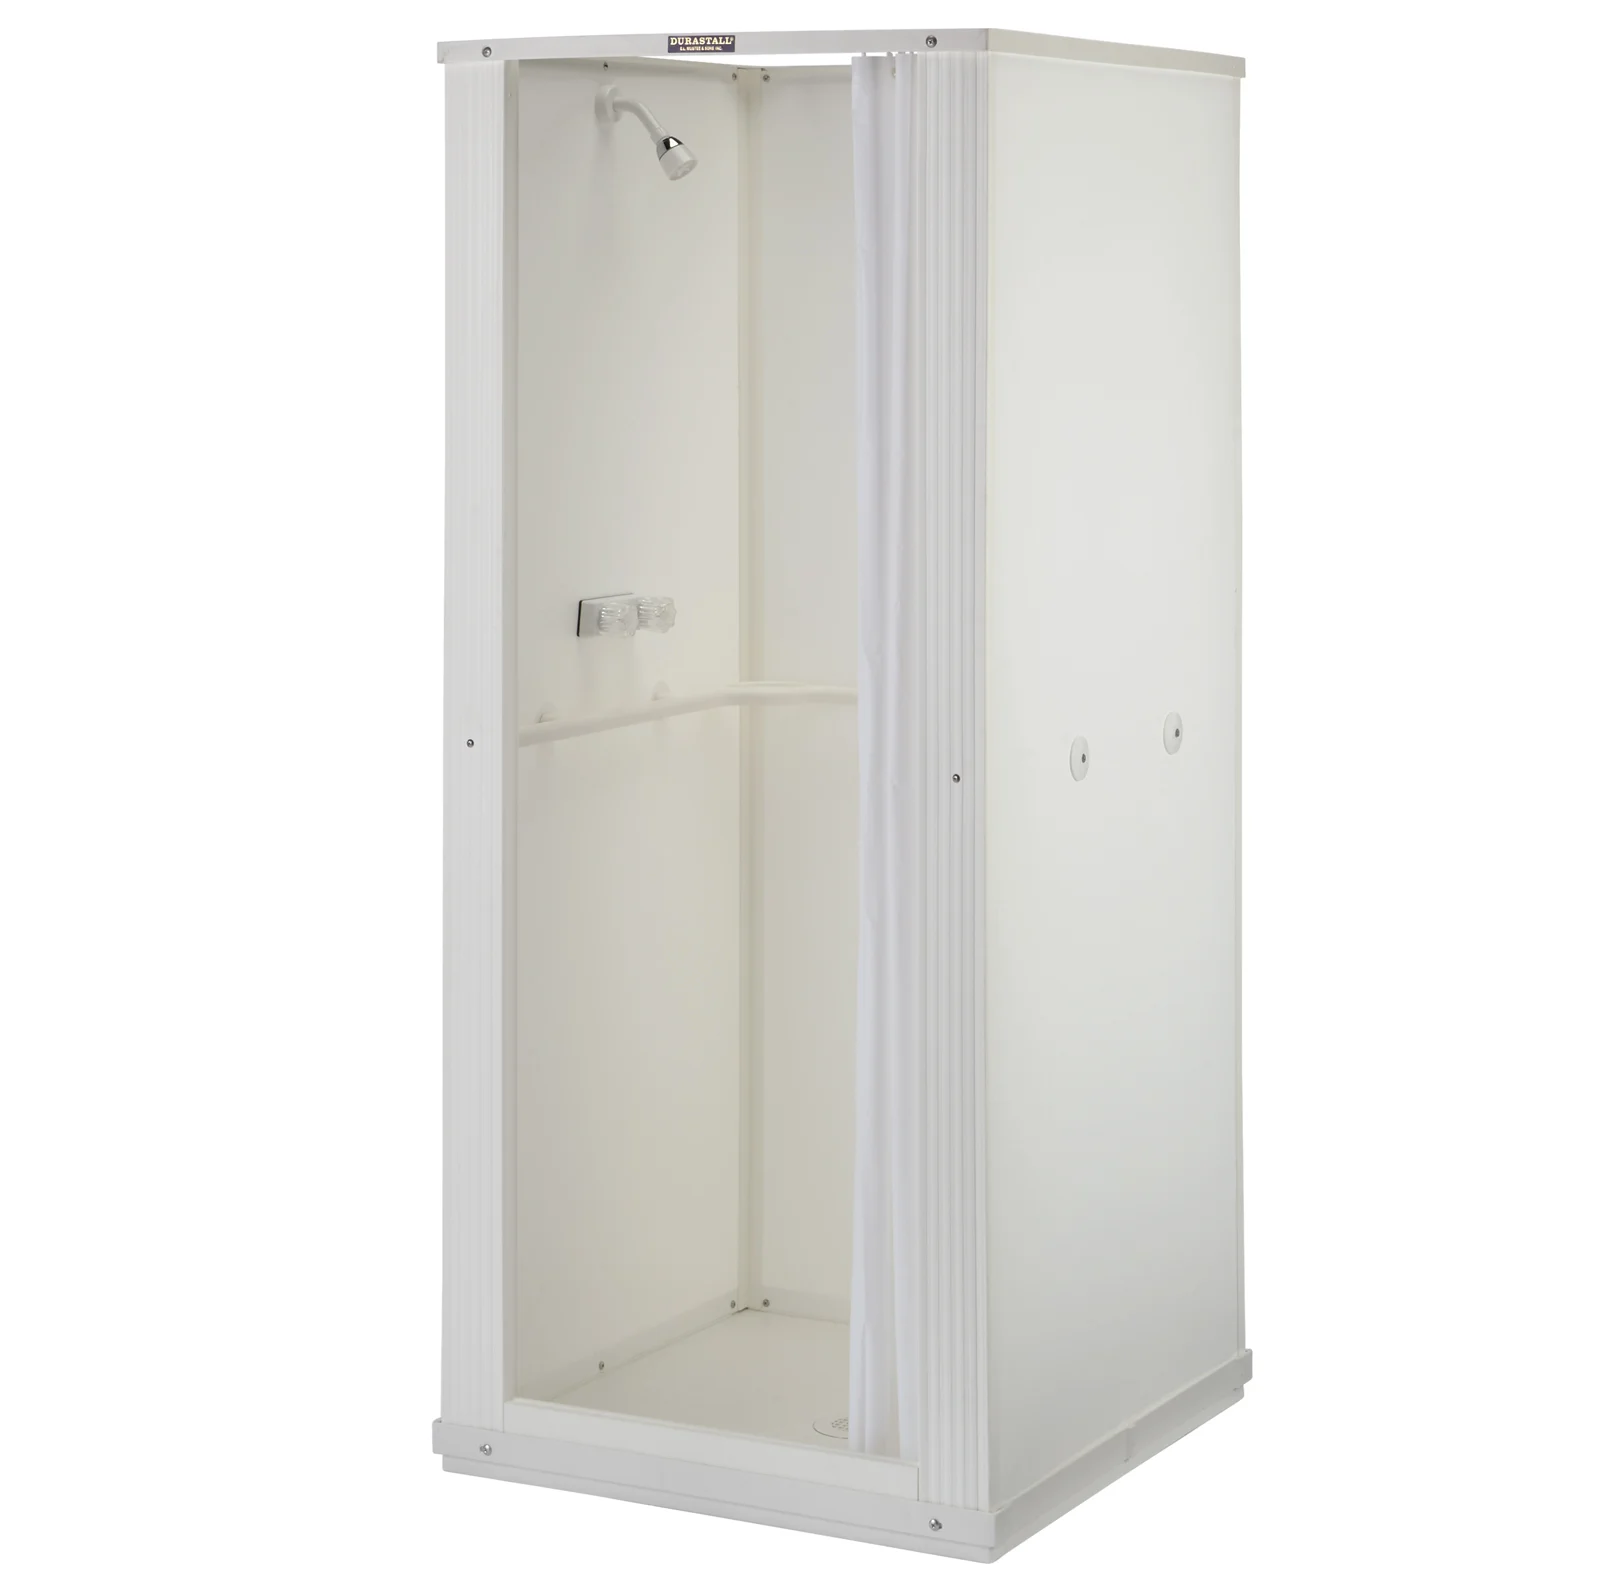 A plastic shower stall